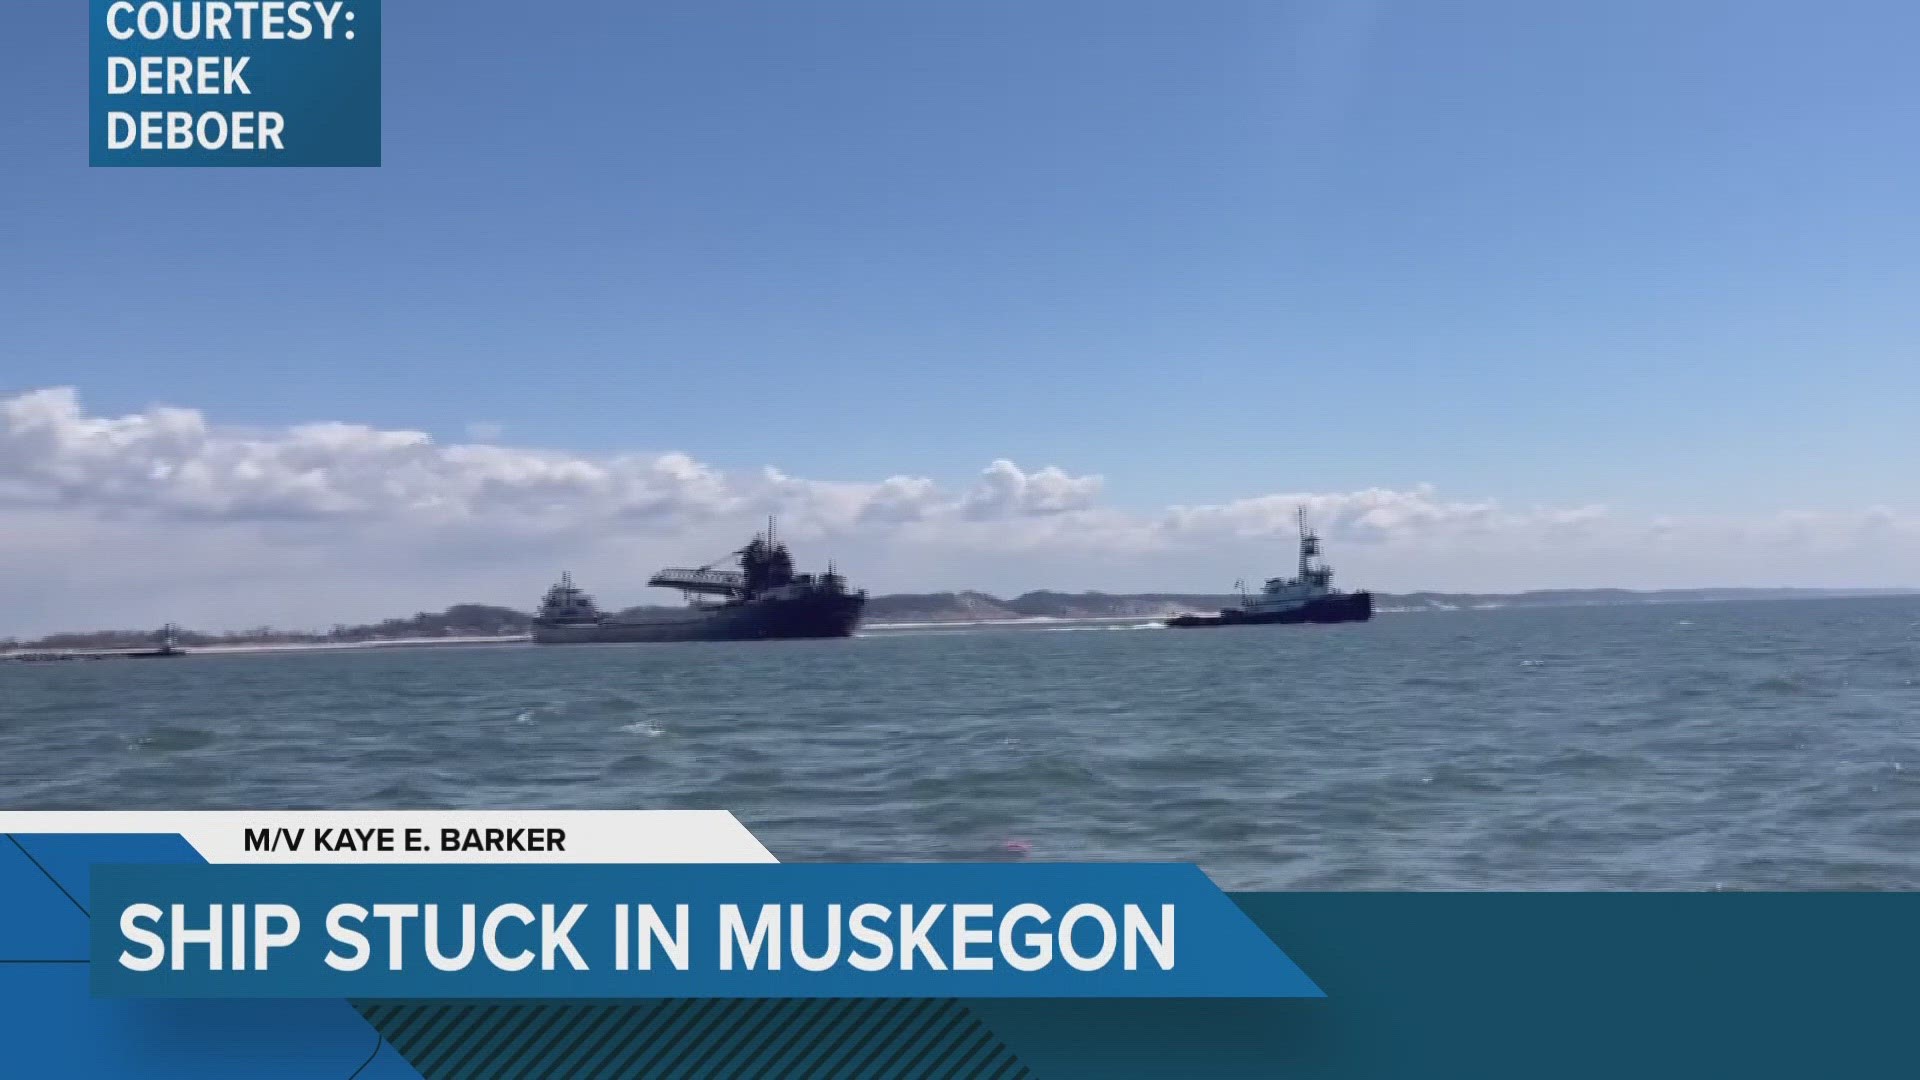 Crews are working to free ship stuck near the Muskegon Channel.